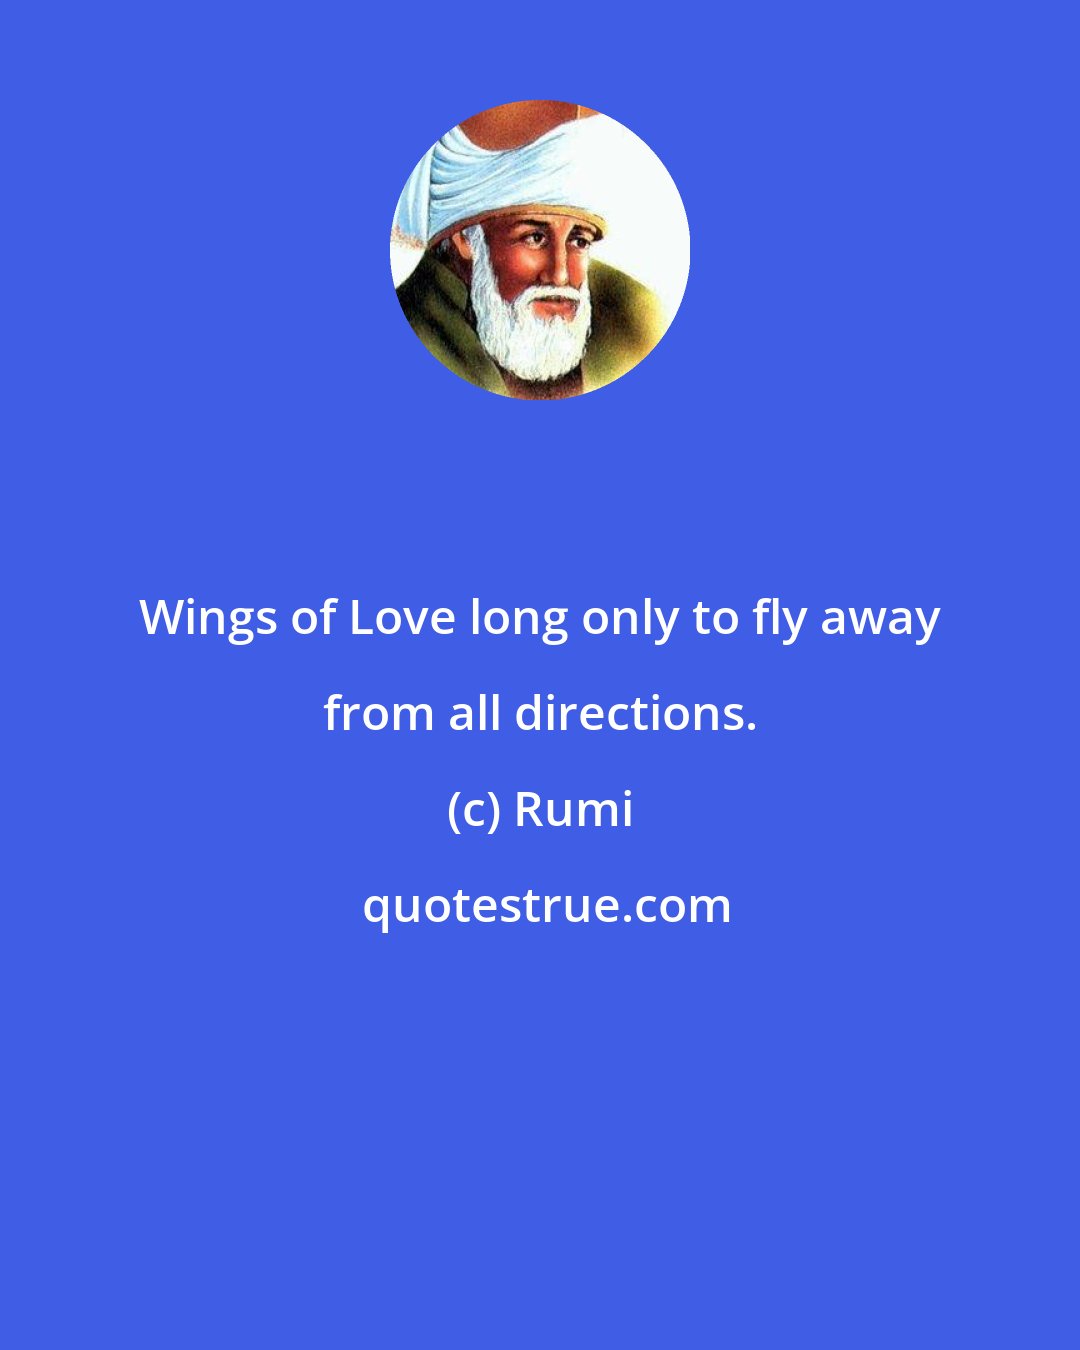 Rumi: Wings of Love long only to fly away from all directions.